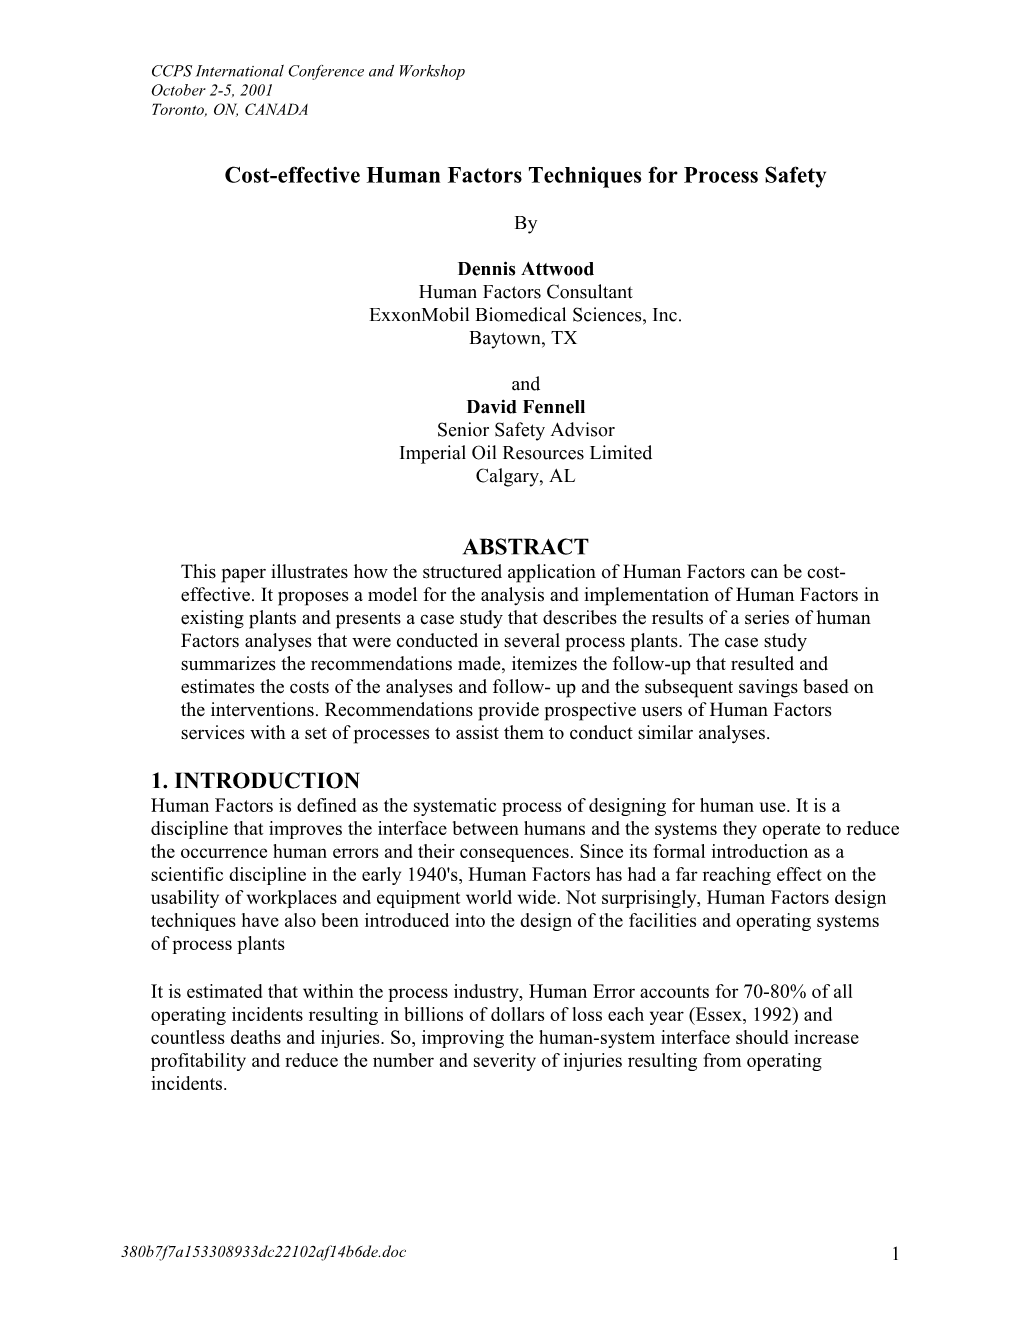 Cost-Effective Human Factors Techniques for Process Safety